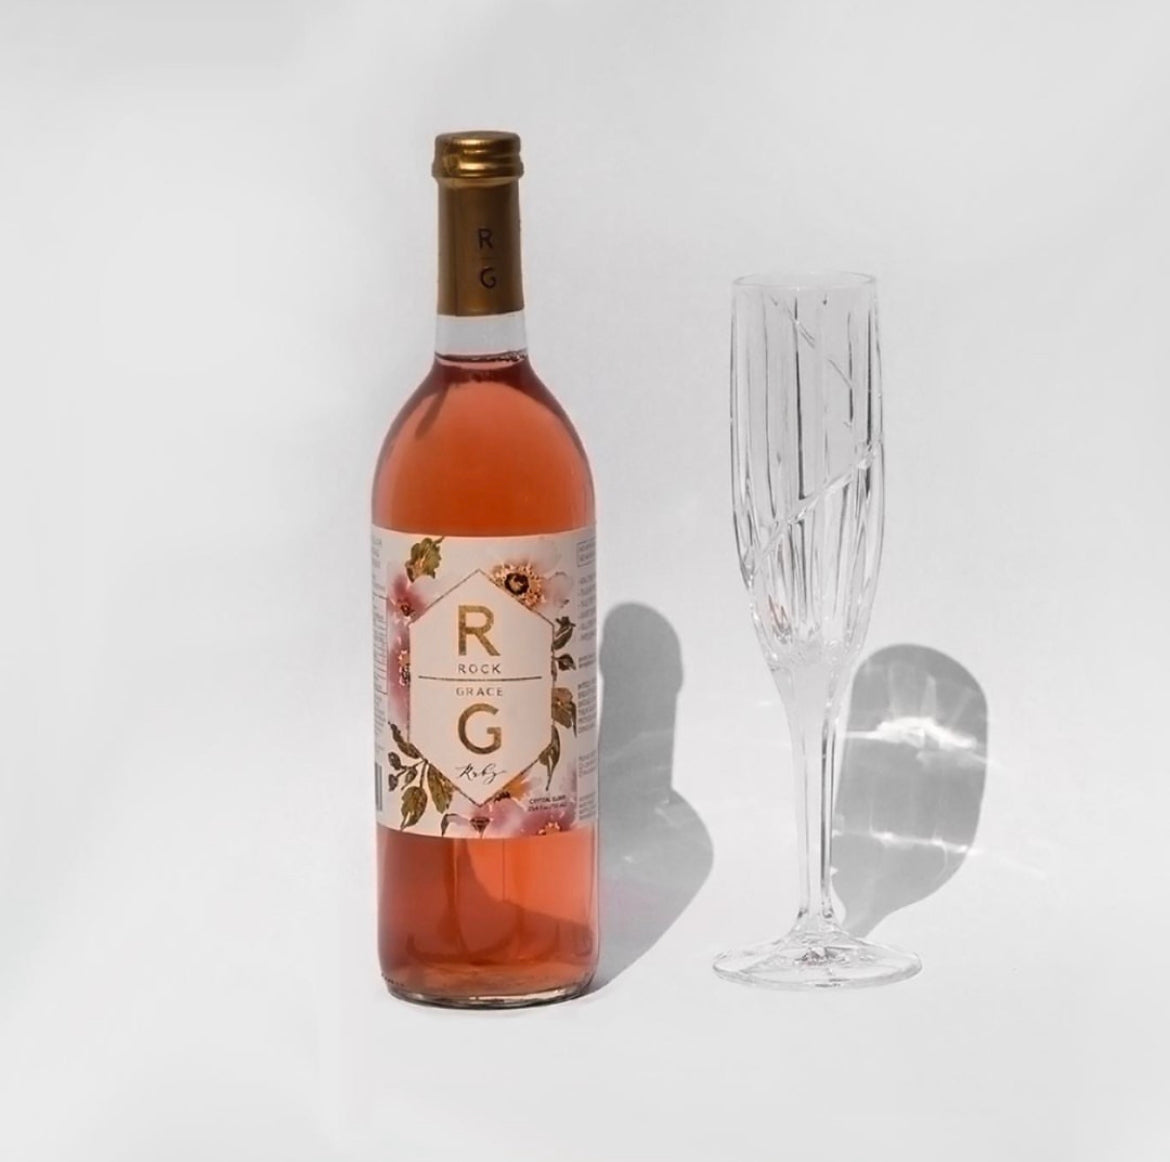 alcohol free canada - rock grace - wine replacement substitute - great tasting non-alcoholic drinks